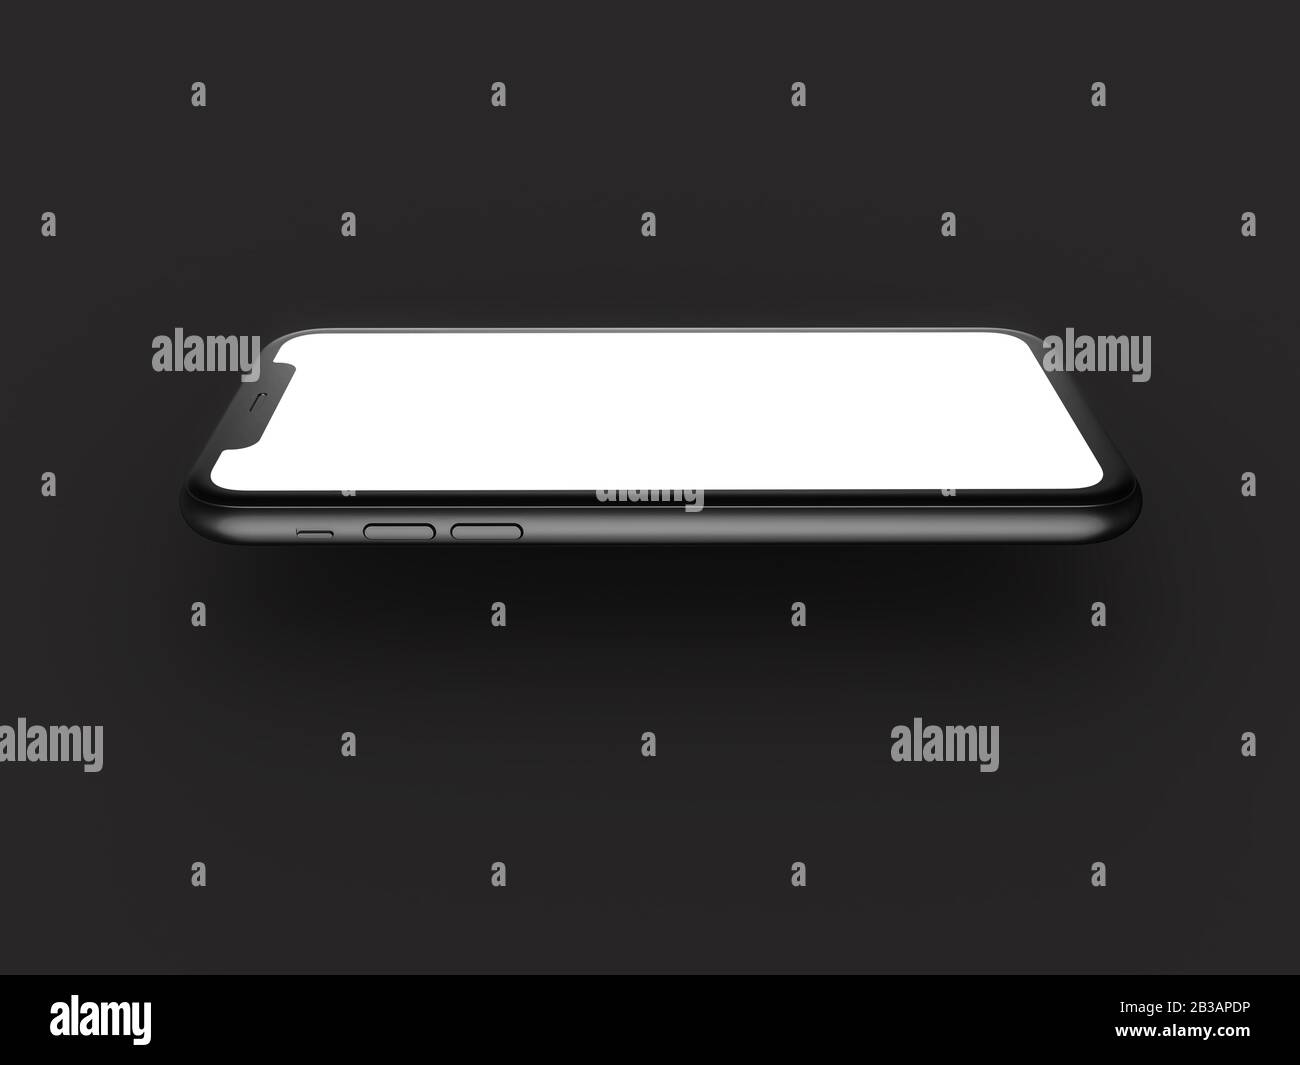 Smartphone in perspective - mockup front side with white screen Isolated on black background. 3D illustration. Stock Photo